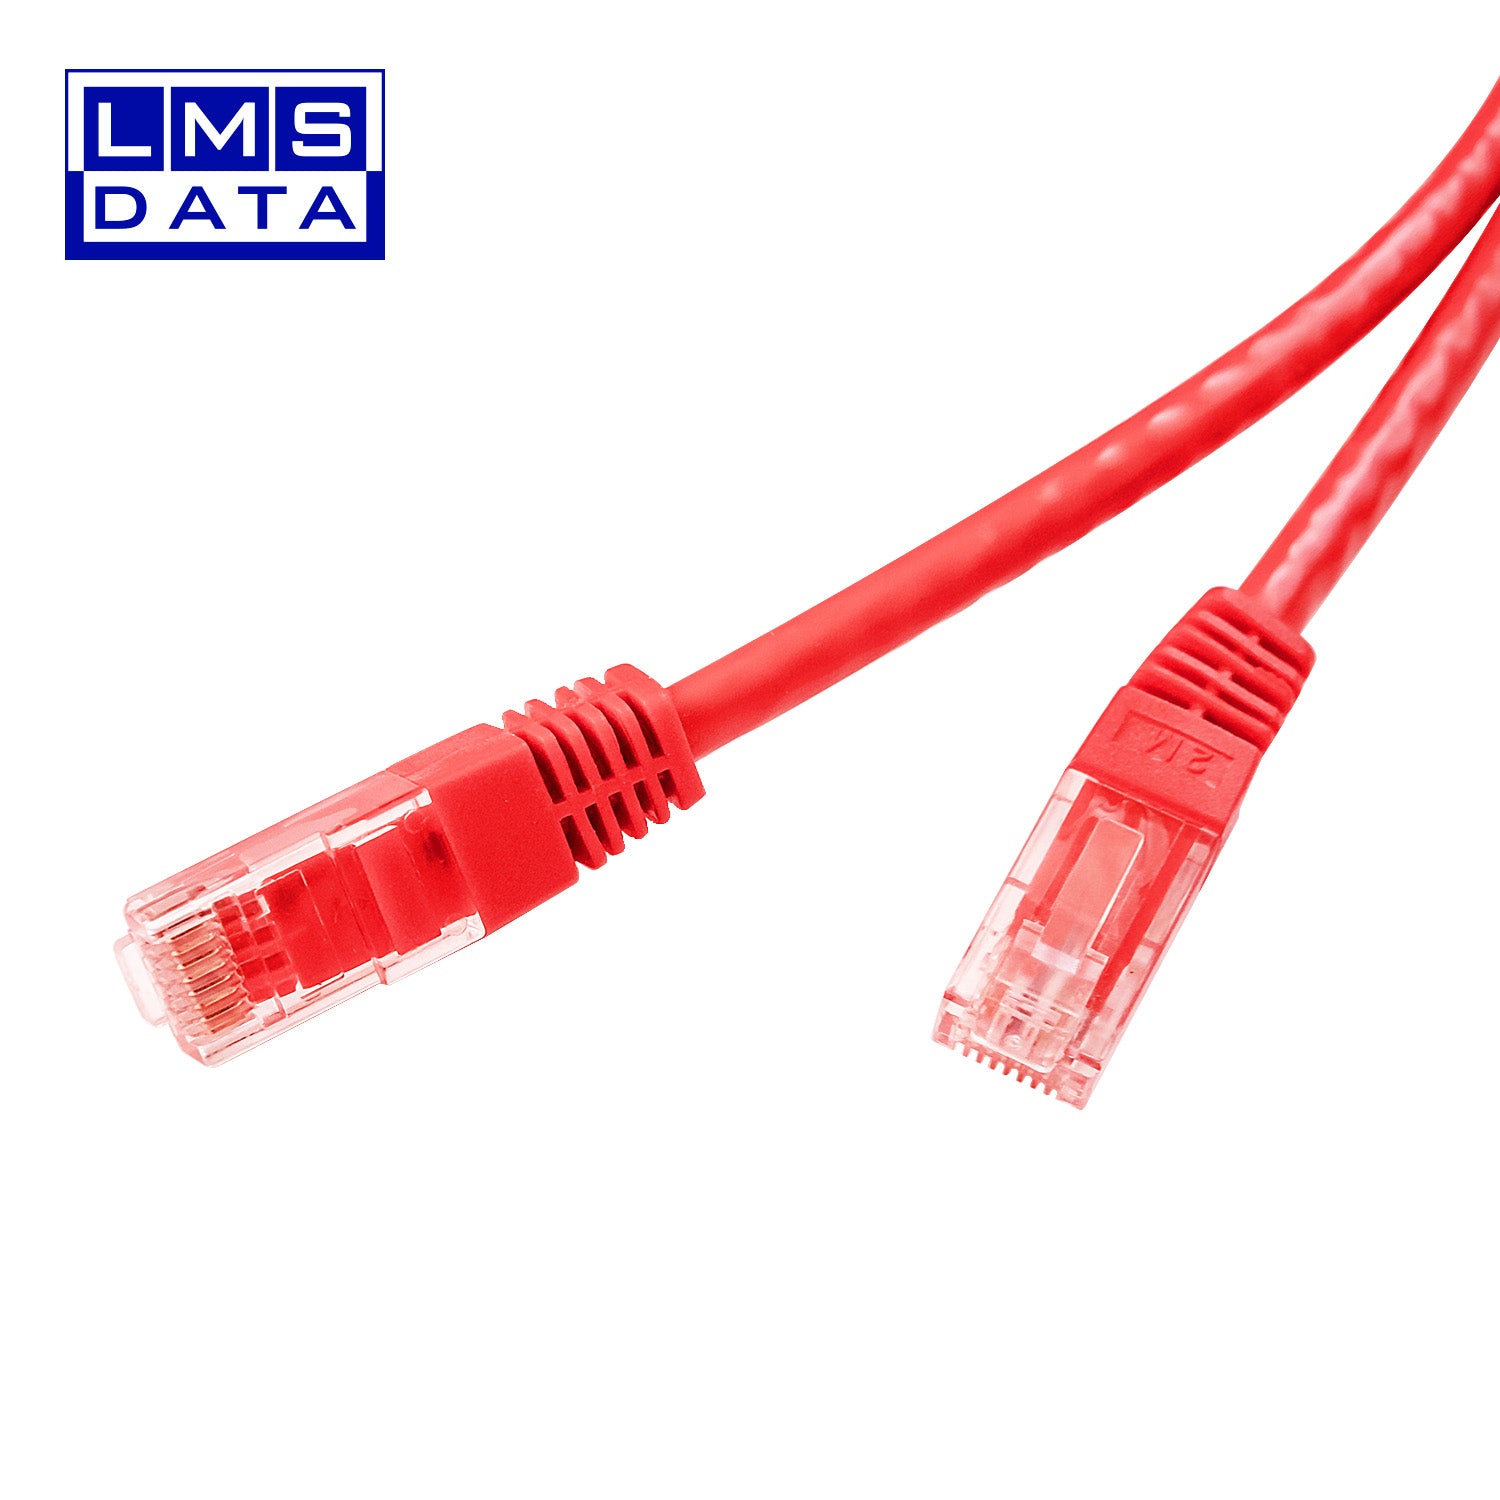 2m patch cord red colour